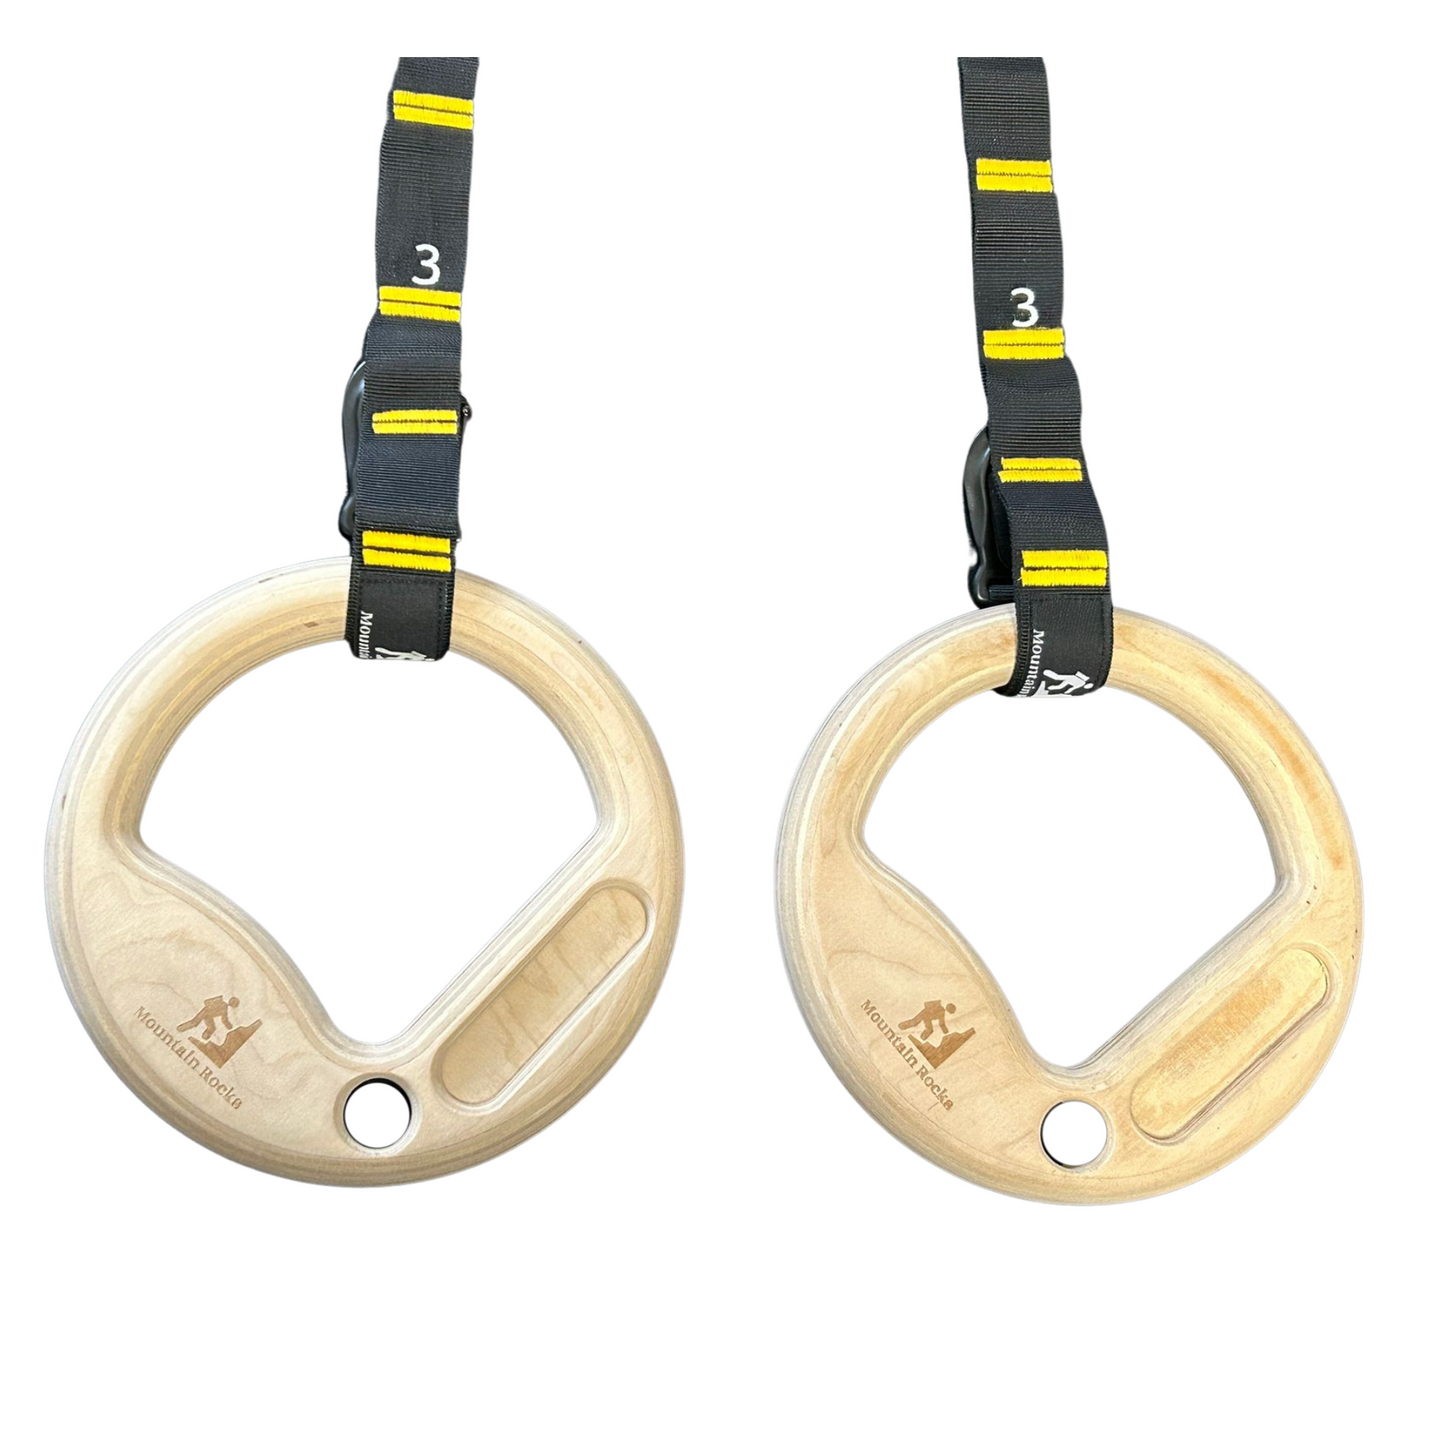 Wood 35mm gymnastic rings with finger training hangboard